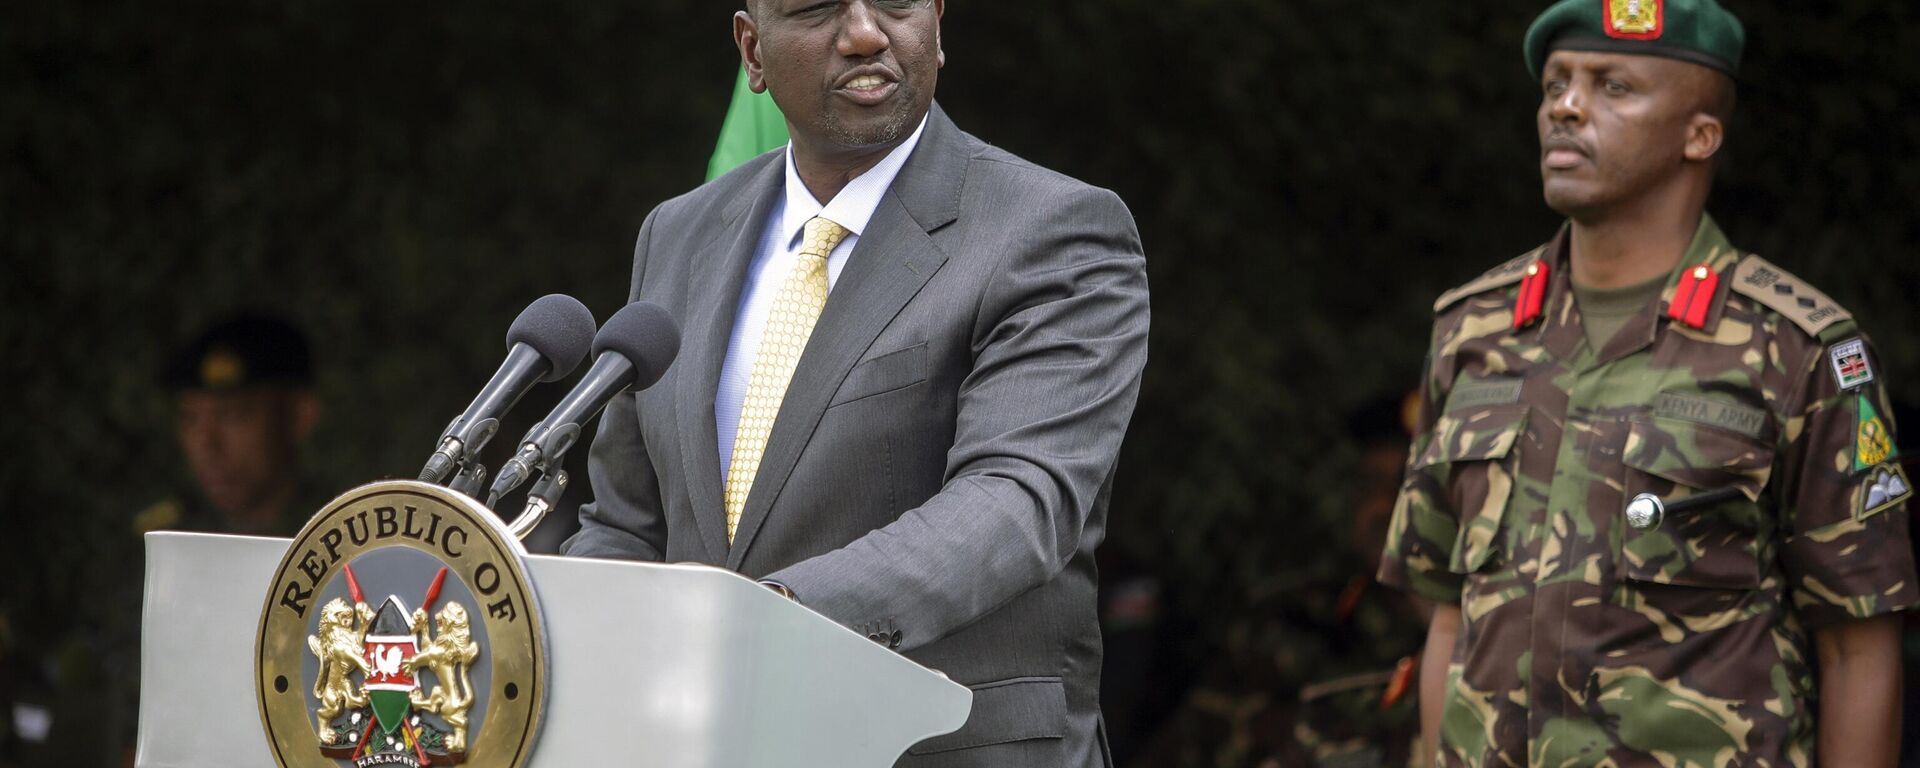 Kenya's President William Ruto speaks at a flag-handover ceremony for members from the Kenya Defence Forces (KDF), ahead of their future deployment to eastern Congo as part of the newly-created East African Community Regional Force (EACRF), at the Embakasi garrison in Nairobi, Kenya Wednesday, Nov. 2, 2022. - Sputnik Africa, 1920, 29.04.2023